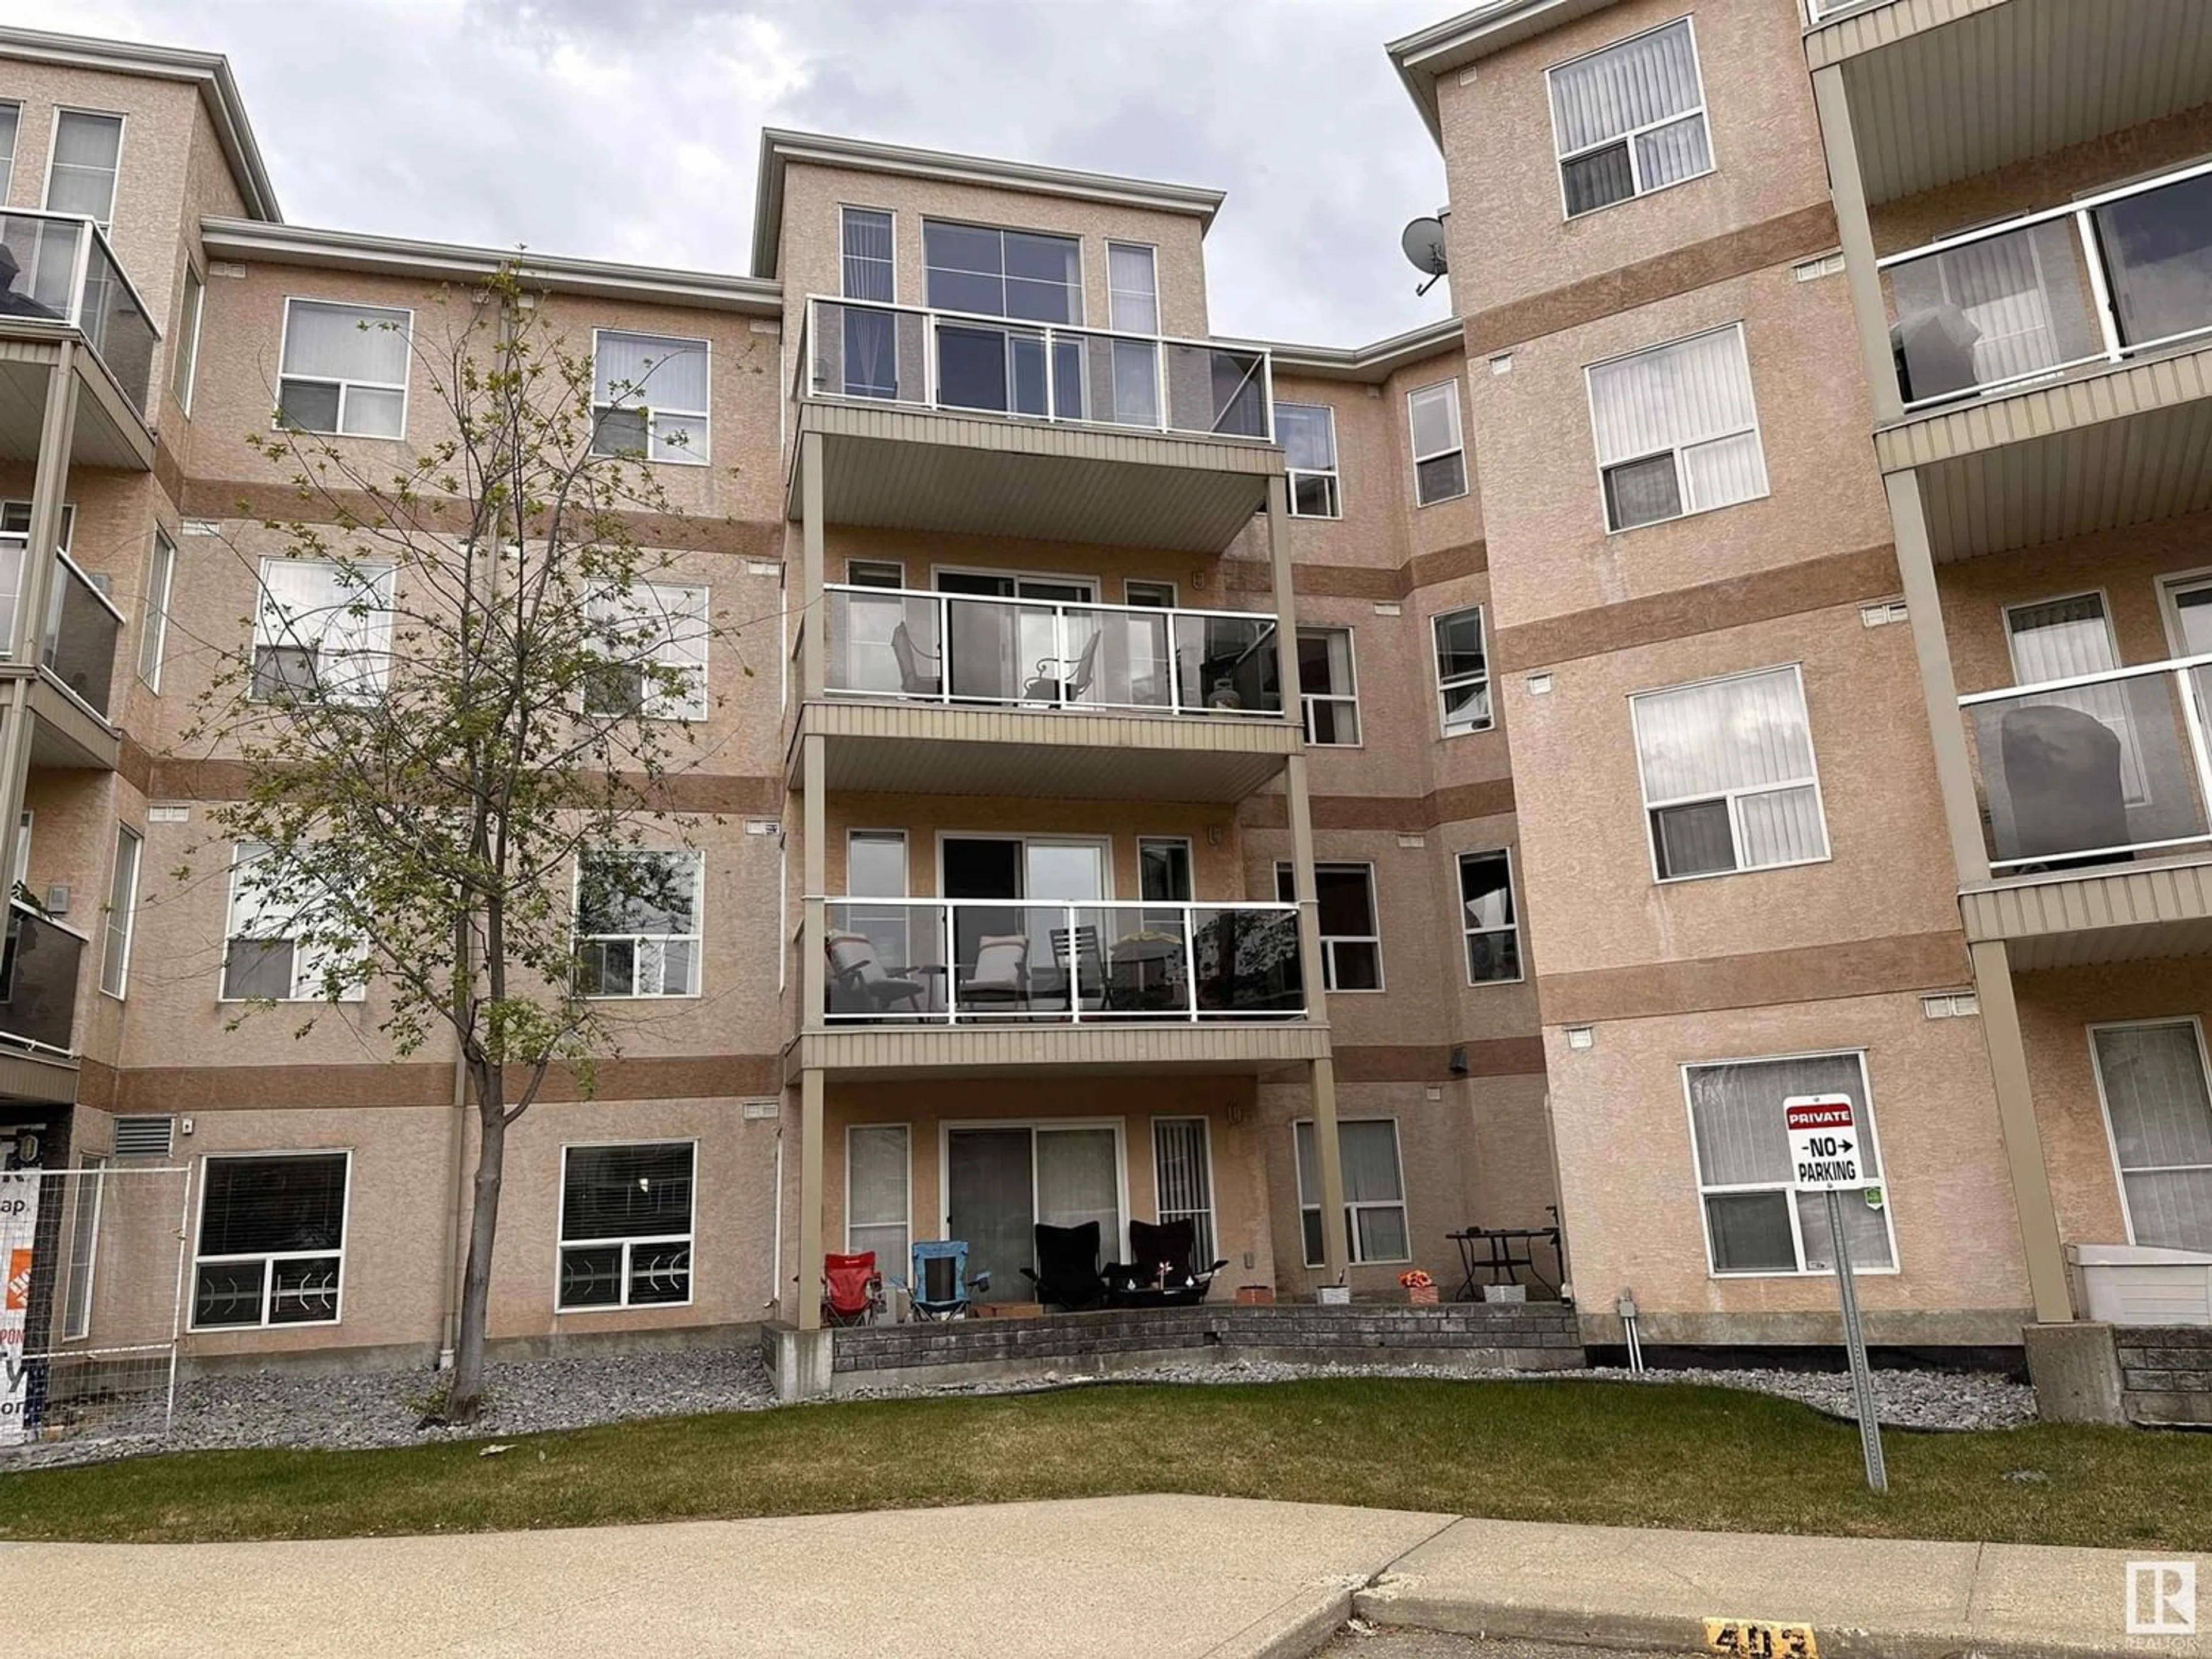 A pic from exterior of the house or condo for #133 9704 174 ST NW, Edmonton Alberta T5T6J4